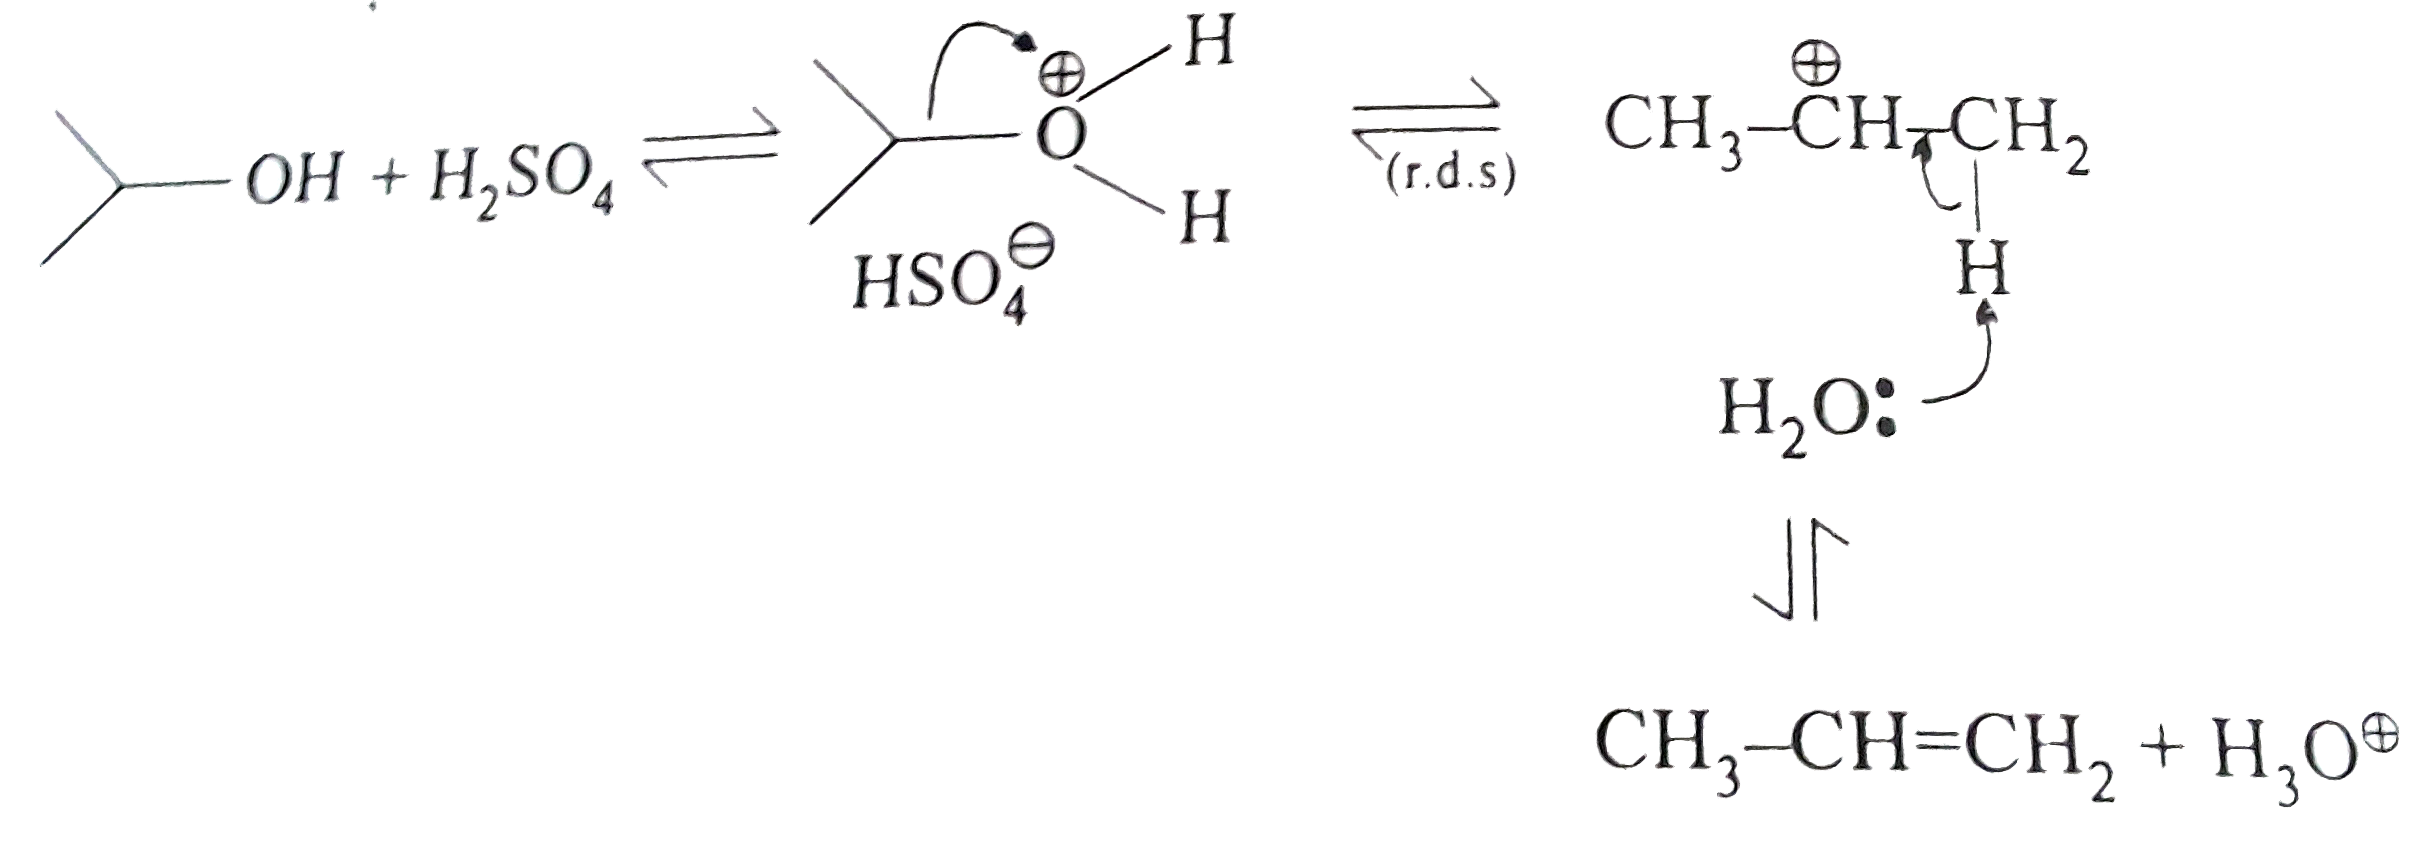 Dehydration require an acid catalyst to protonate the hydroxy group of the alcohol and convert it into good leaving group. Loss of water followed by a loss of proton, given the alkene an equilibrium is established between reactants and products.         ltimg src=